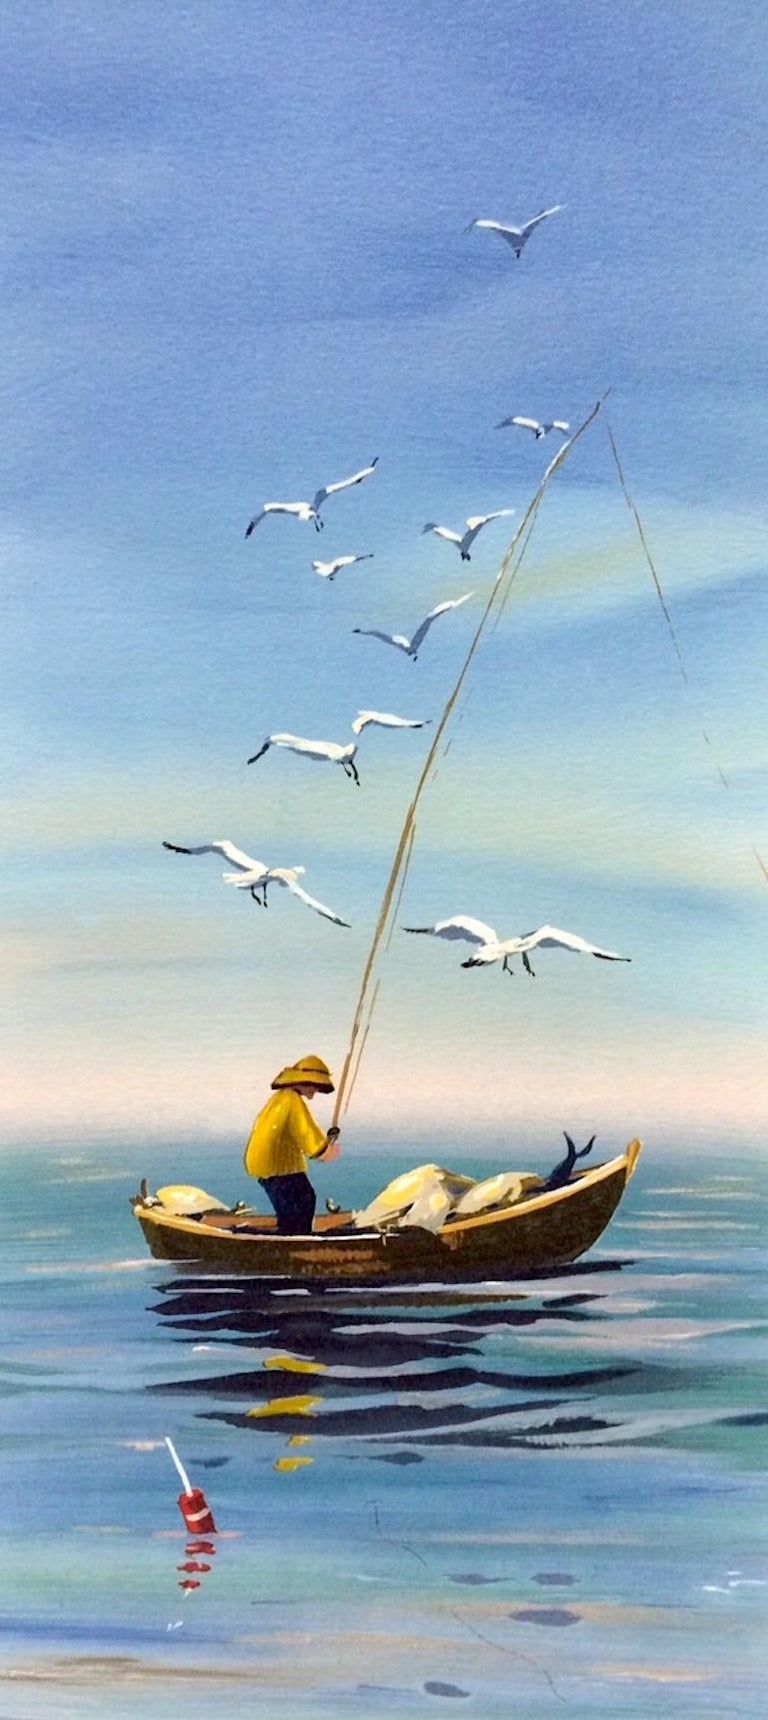 EARLY CATCH Signed Lithograph, New England Fisherman, Small Boat Print, Seagulls - Black Landscape Print by Sally Caldwell-Fisher